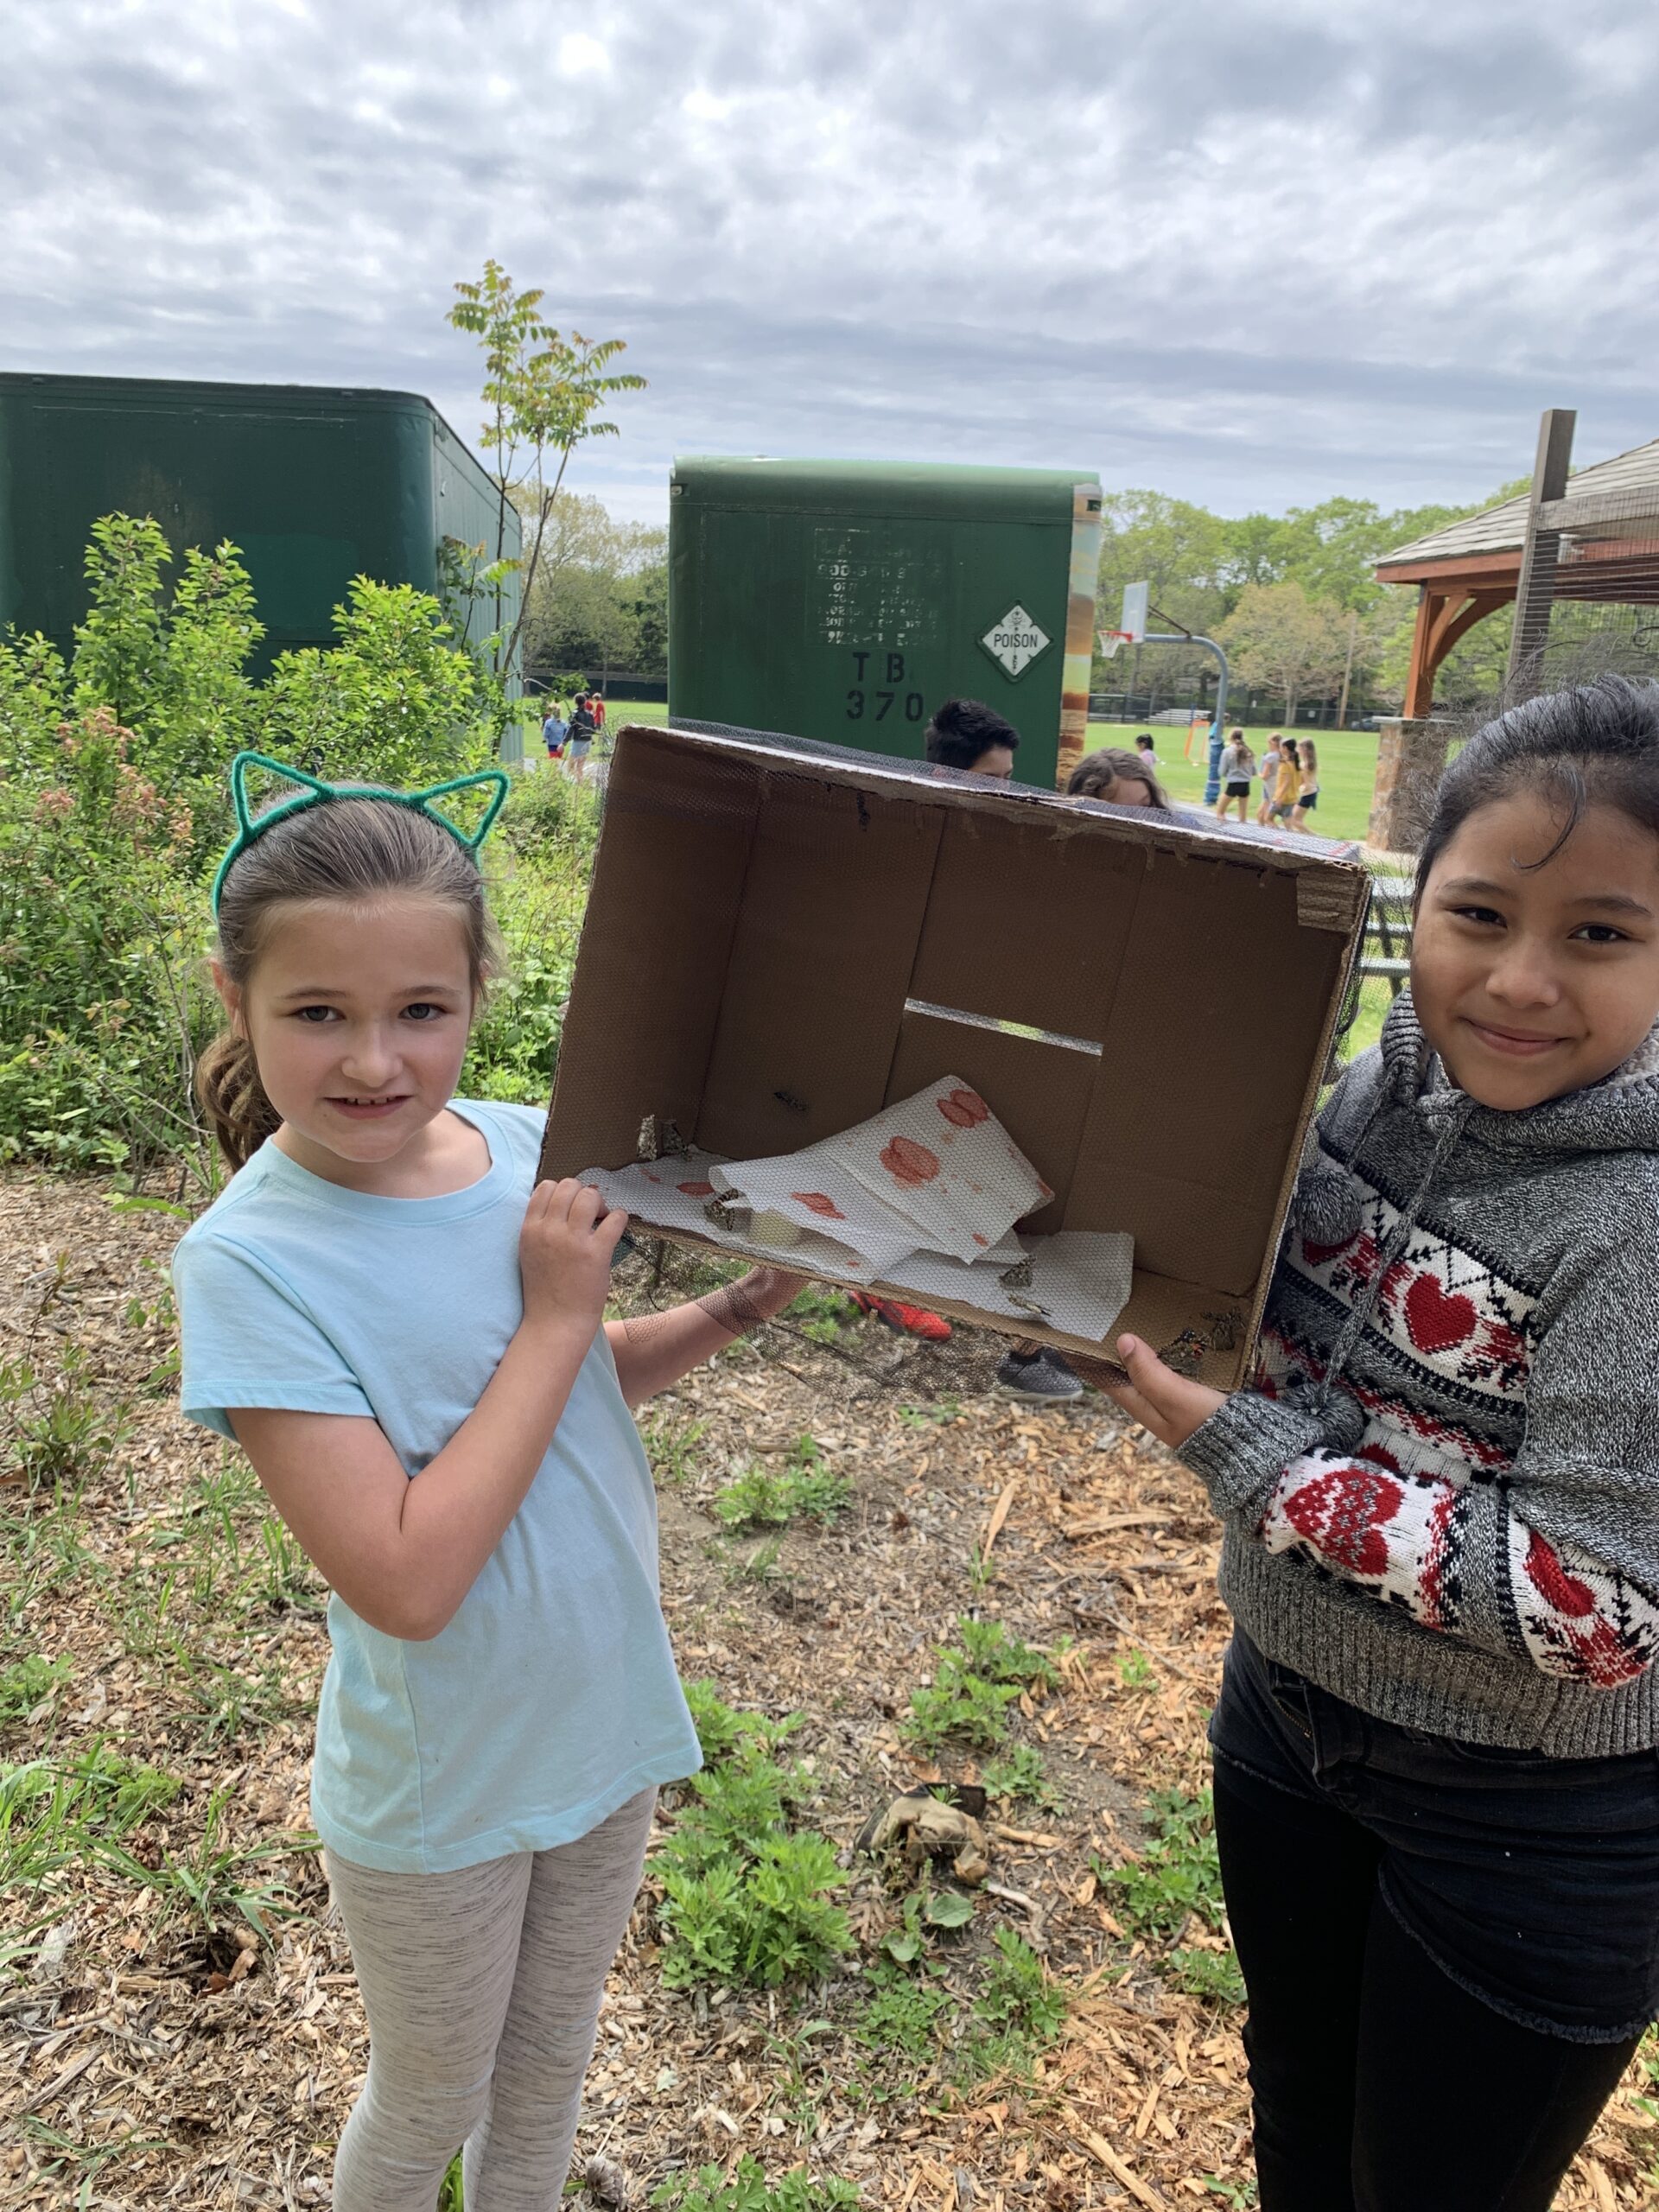 East Quogue Elementary School third graders, including Sophia Cagno and Cristel Martinez, had the opportunity to learn about butterflies by raising their very own caterpillars.  Students observed their caterpillars daily while learning about all of the different stages they will go through during the unit. Once caterpillars formed their chrysalis, they were transferred to a larger box while we eagerly waited for them to go through their metamorphosis.  Then they celebrated with a butterfly release day.